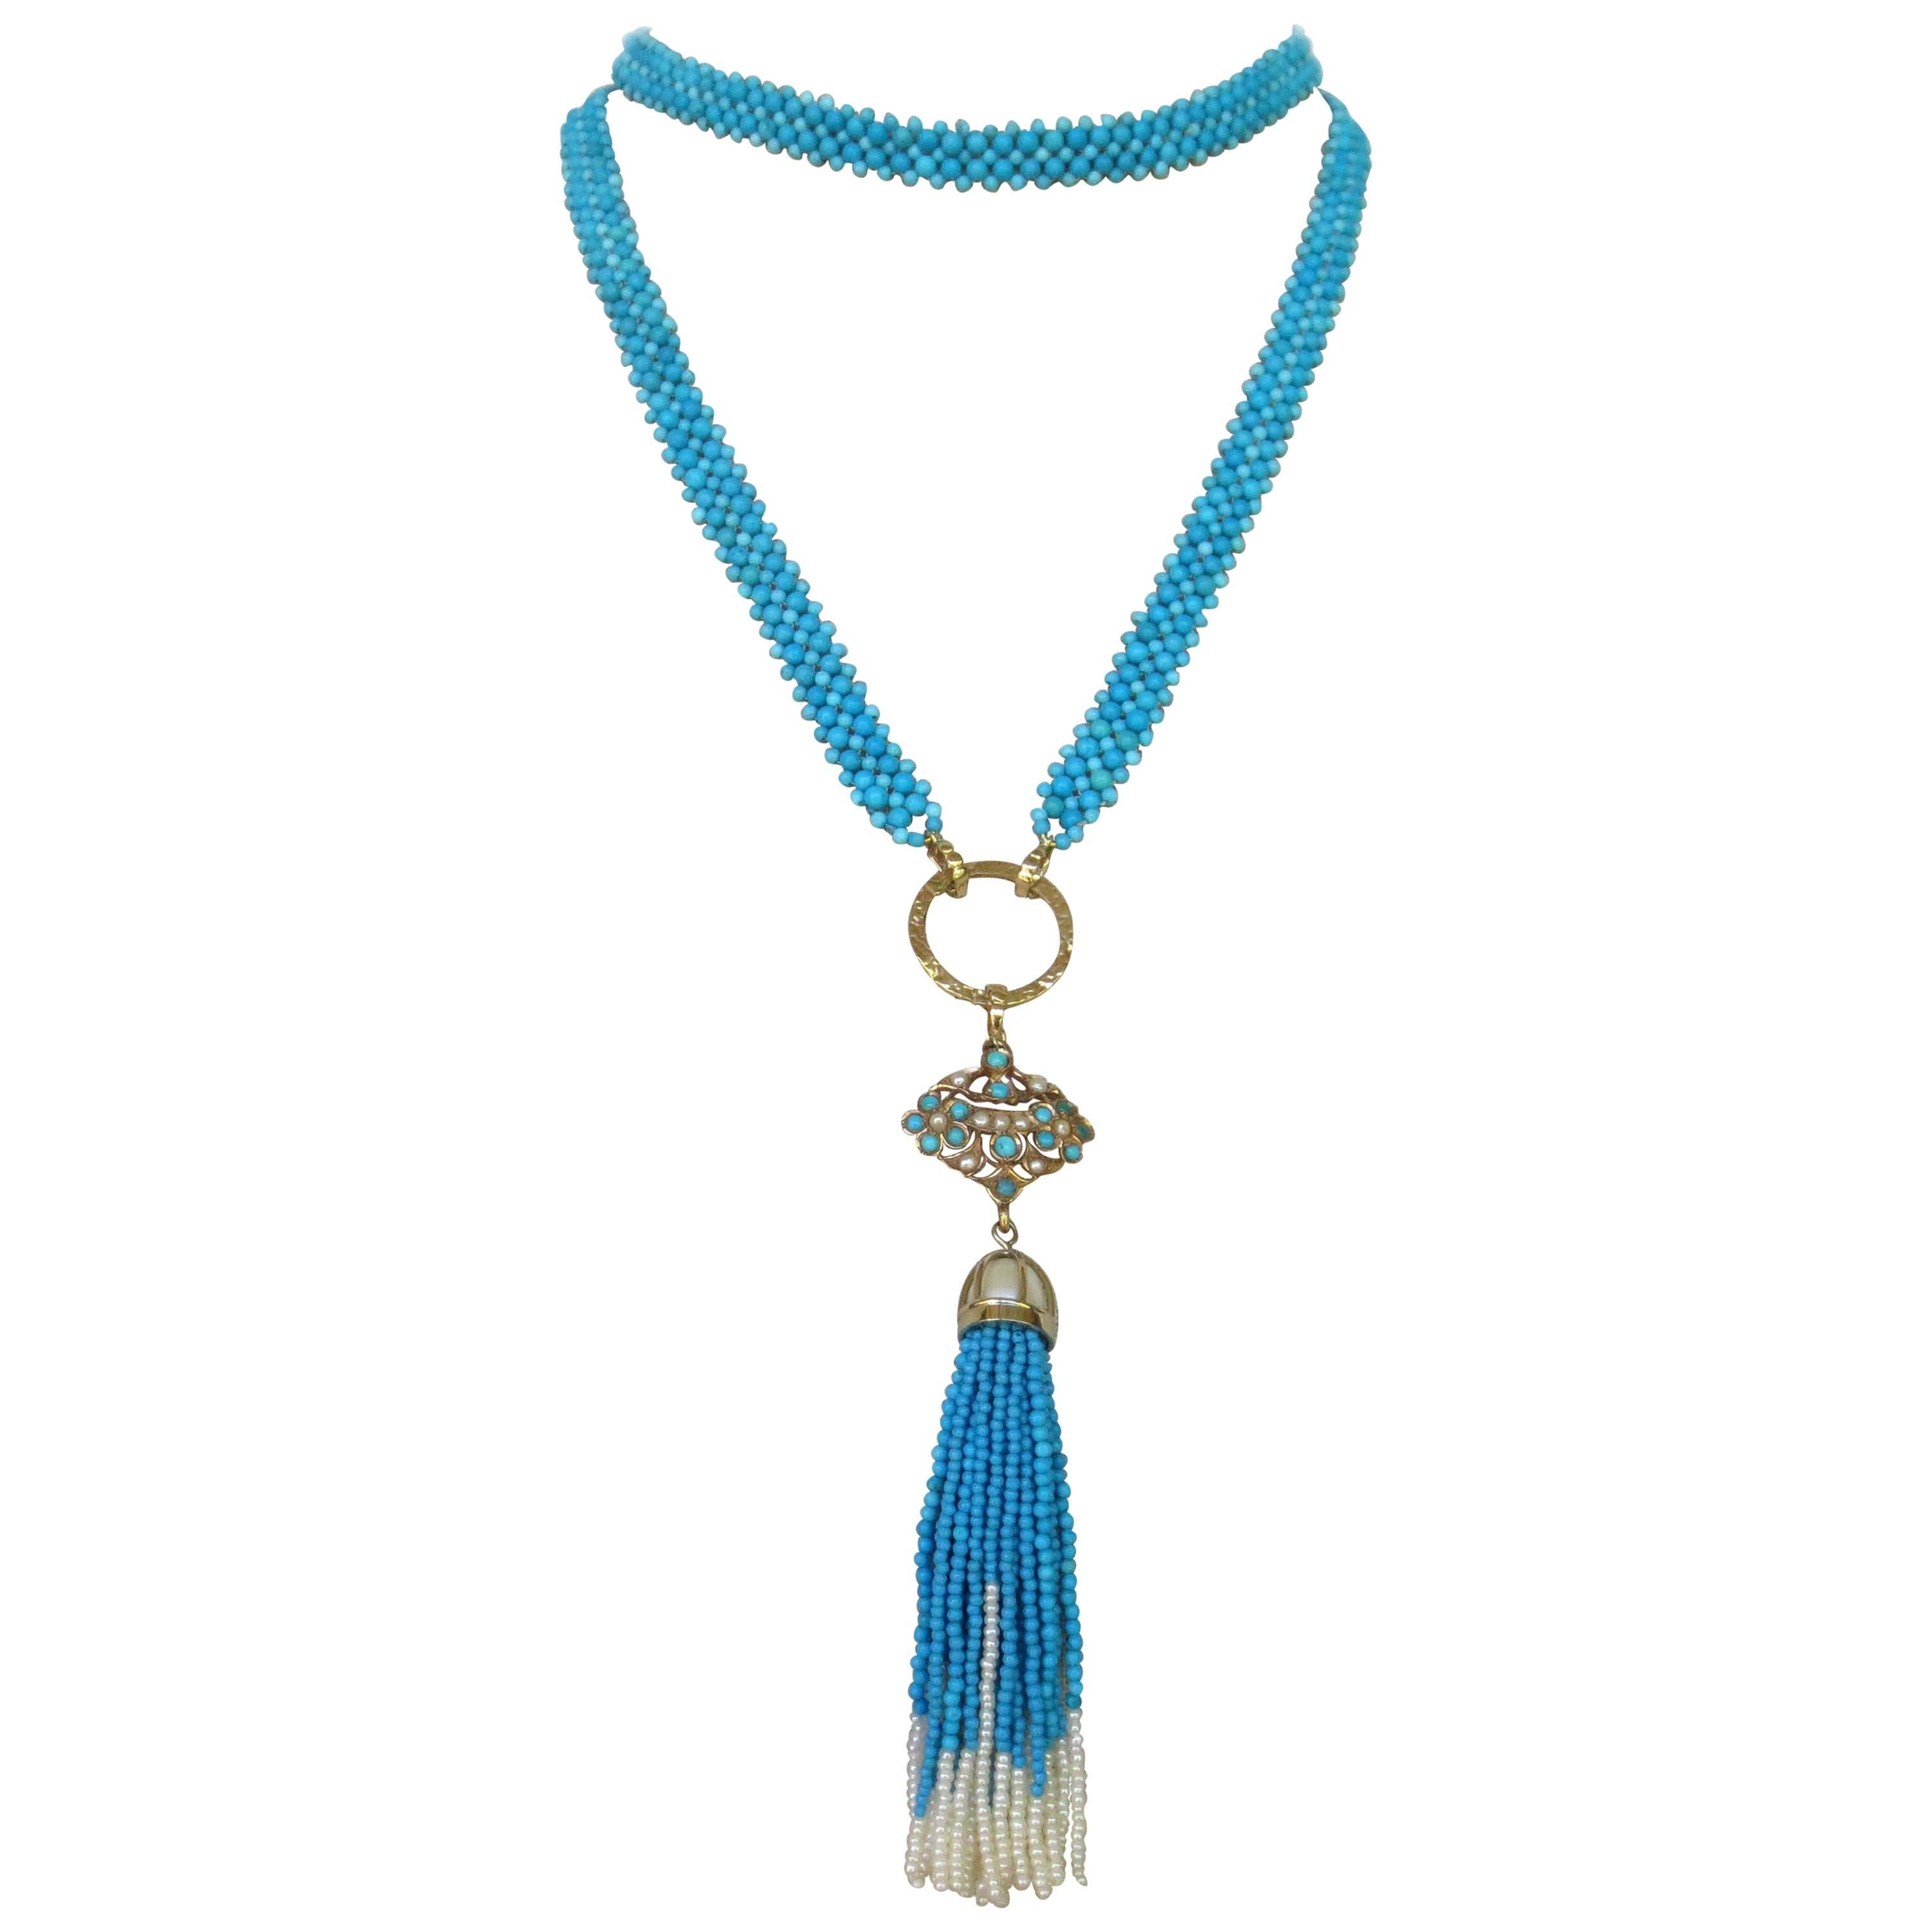 Marina j Multi-Strand Woven Turquoise Bead and Pearl Sautoir Necklace